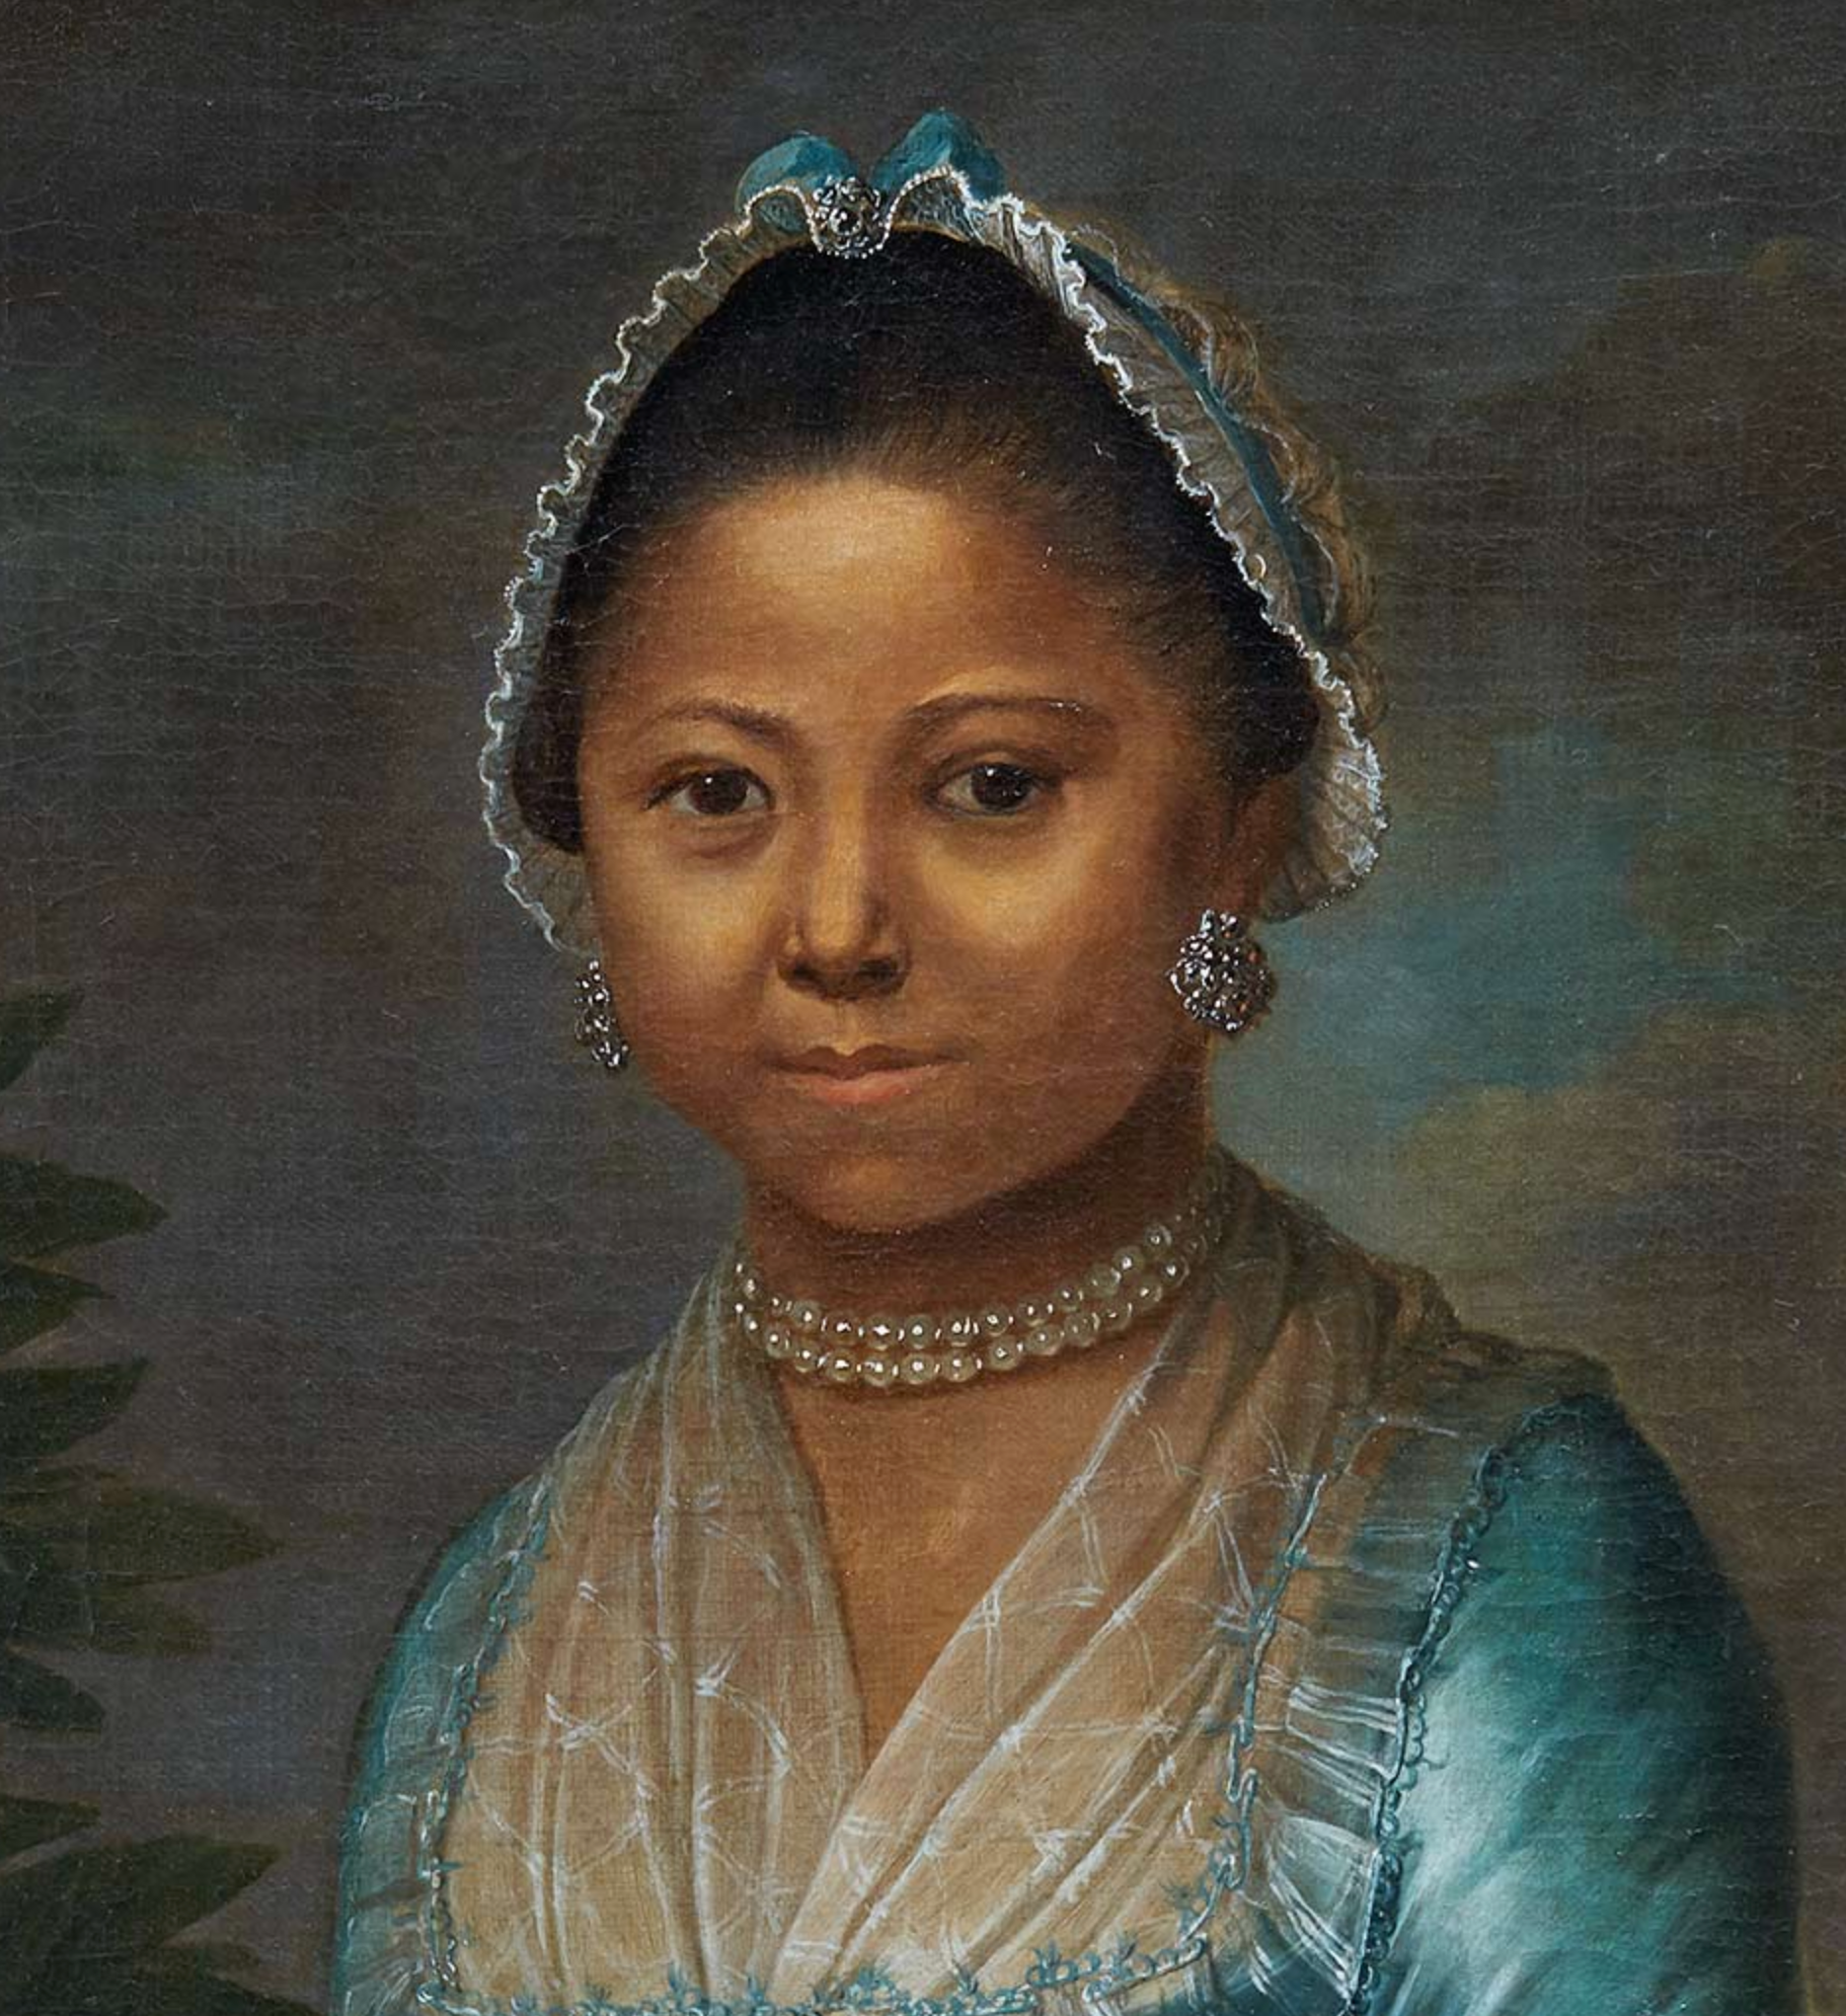 Example of 18th century cut-steel earrings. This painting was acquired by the Art Gallery of Ontario in 2020. It is notable as one of the few portraits of an 18th century young woman of color.  Detail of Portrait of a Lady Holding an Orange Blossom, unknown, mid-18th century. 